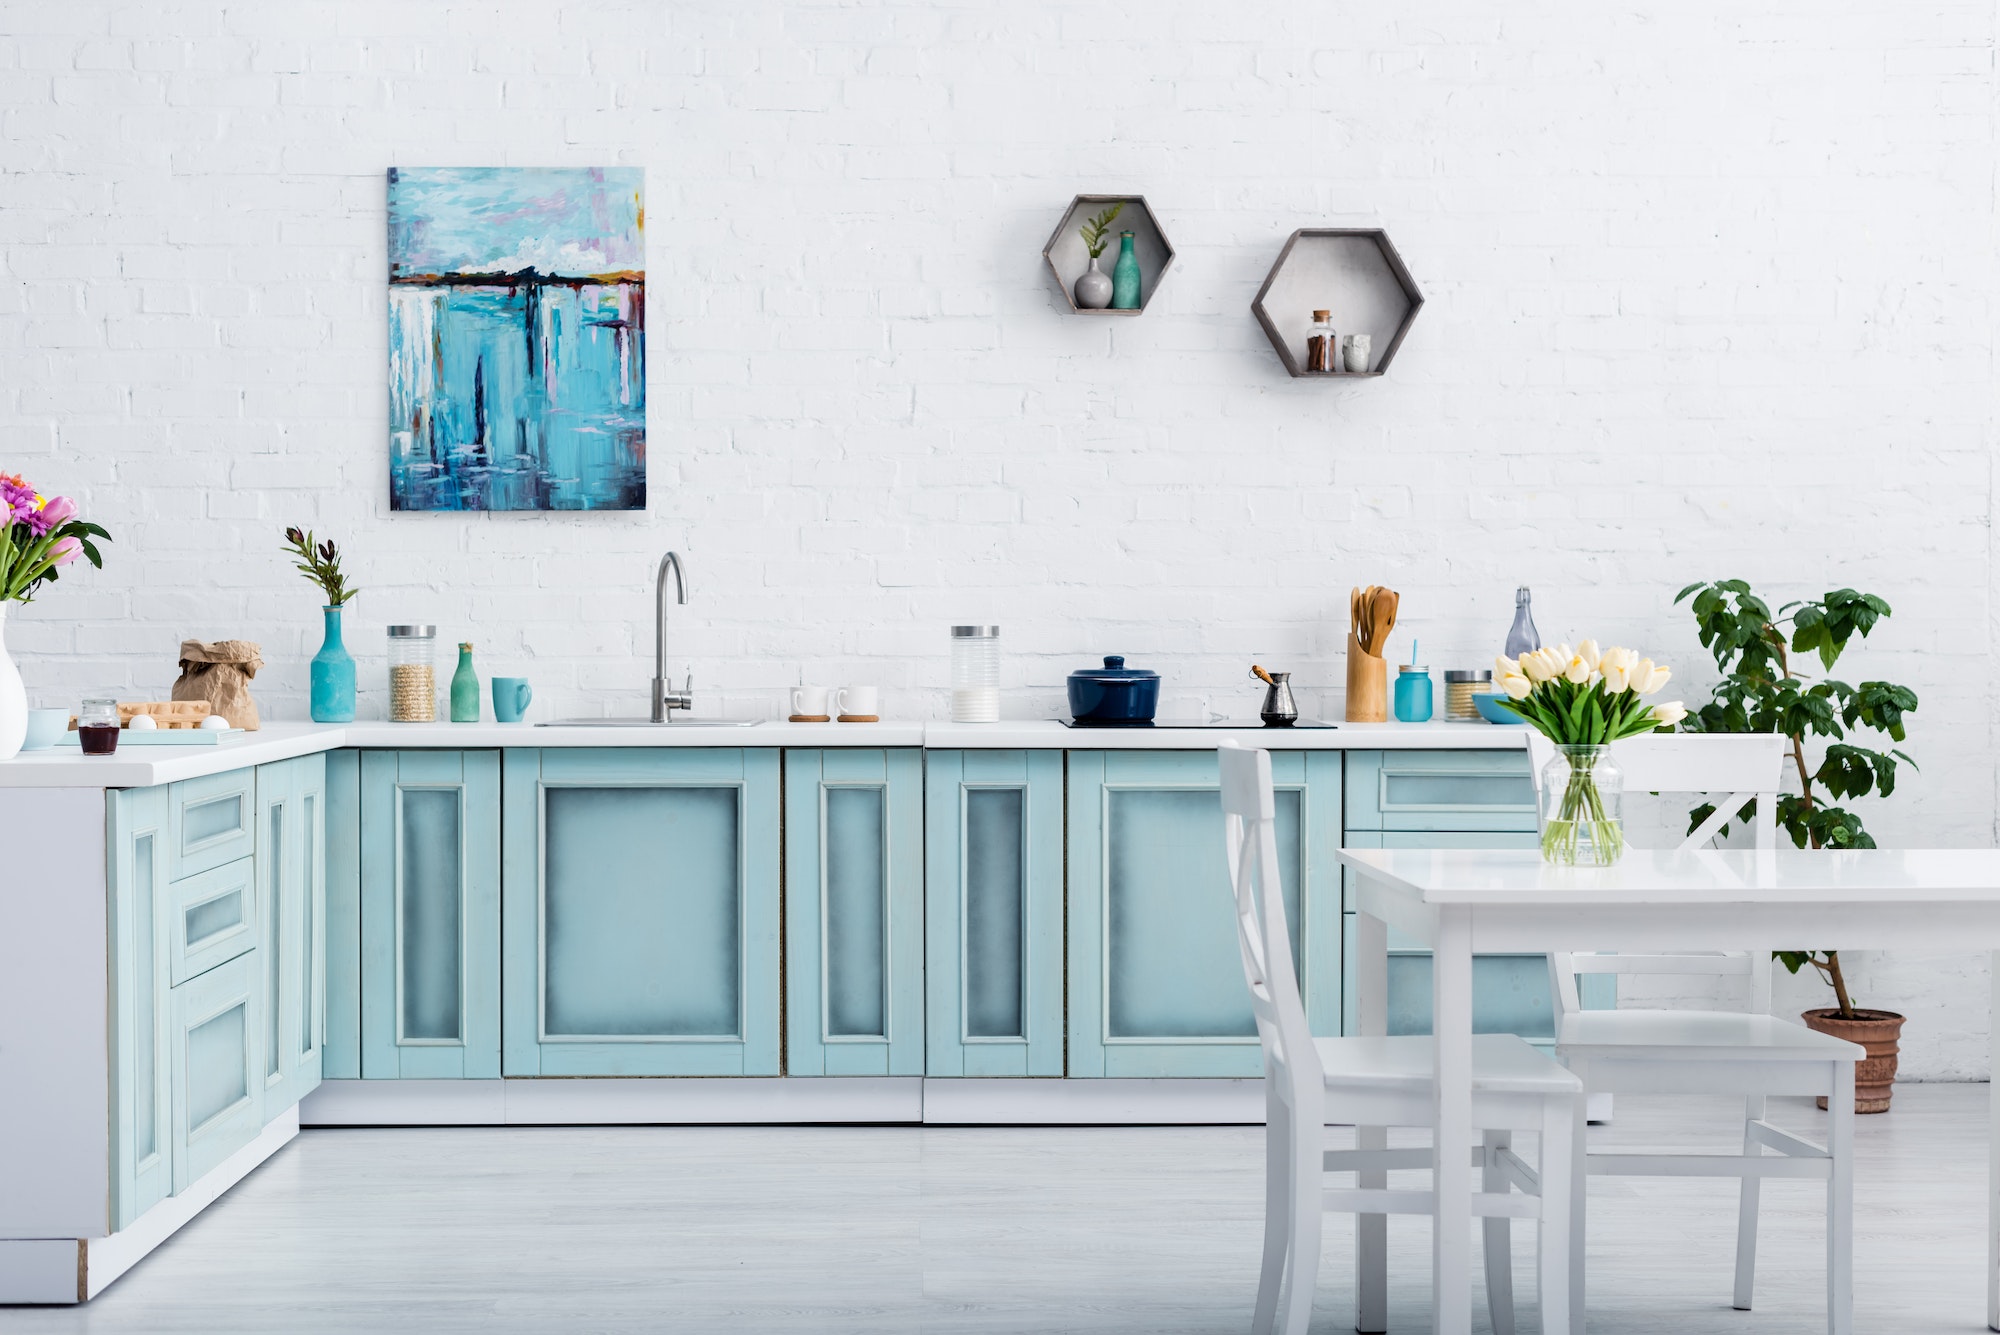 interior of turquoise and white kitchen with kitchenware and decor